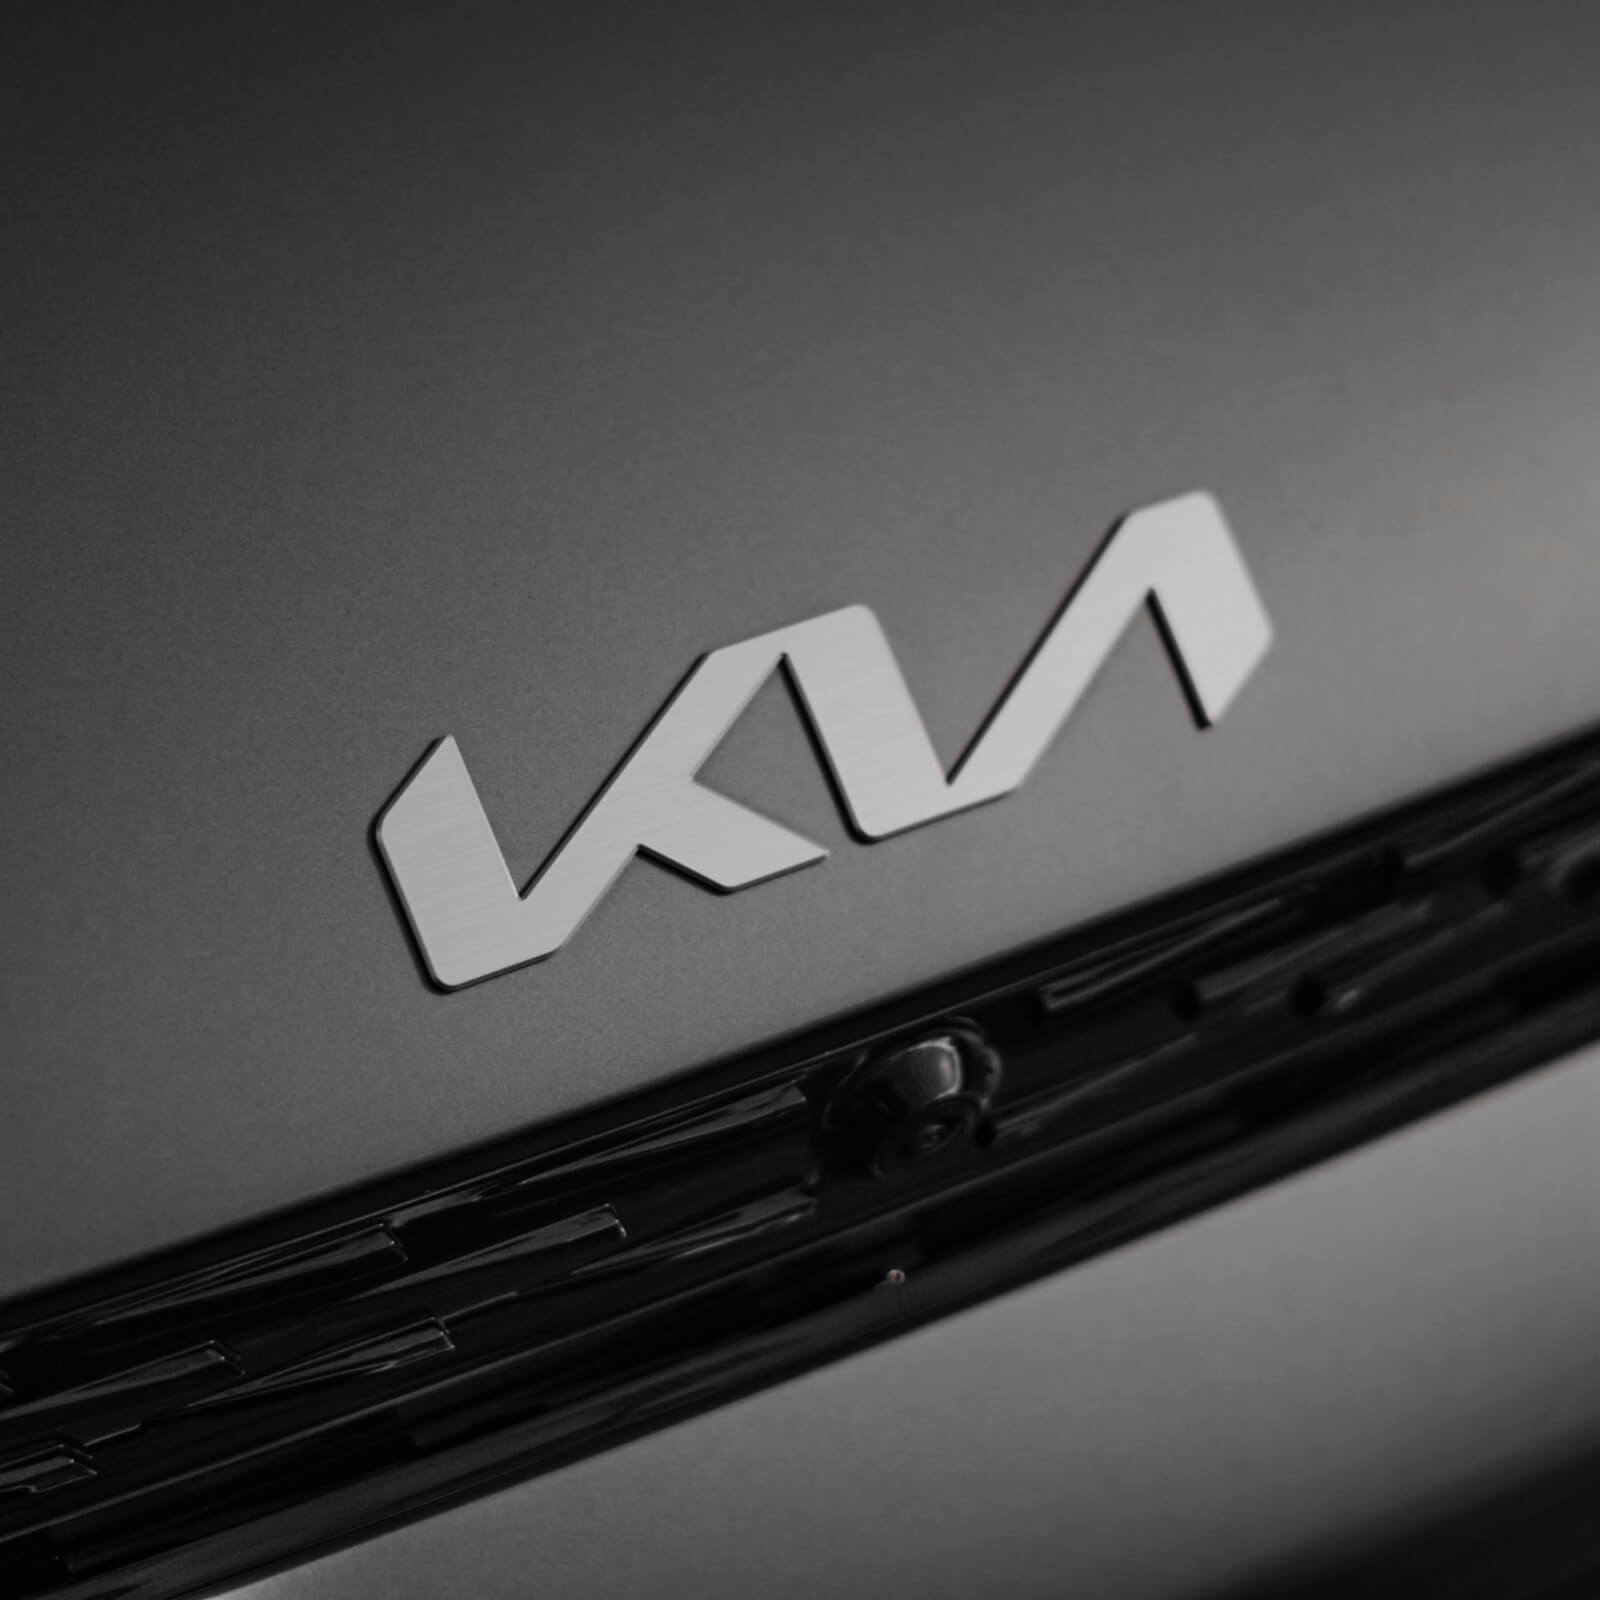 In the Case of Kia: Creating Attention With Controversy